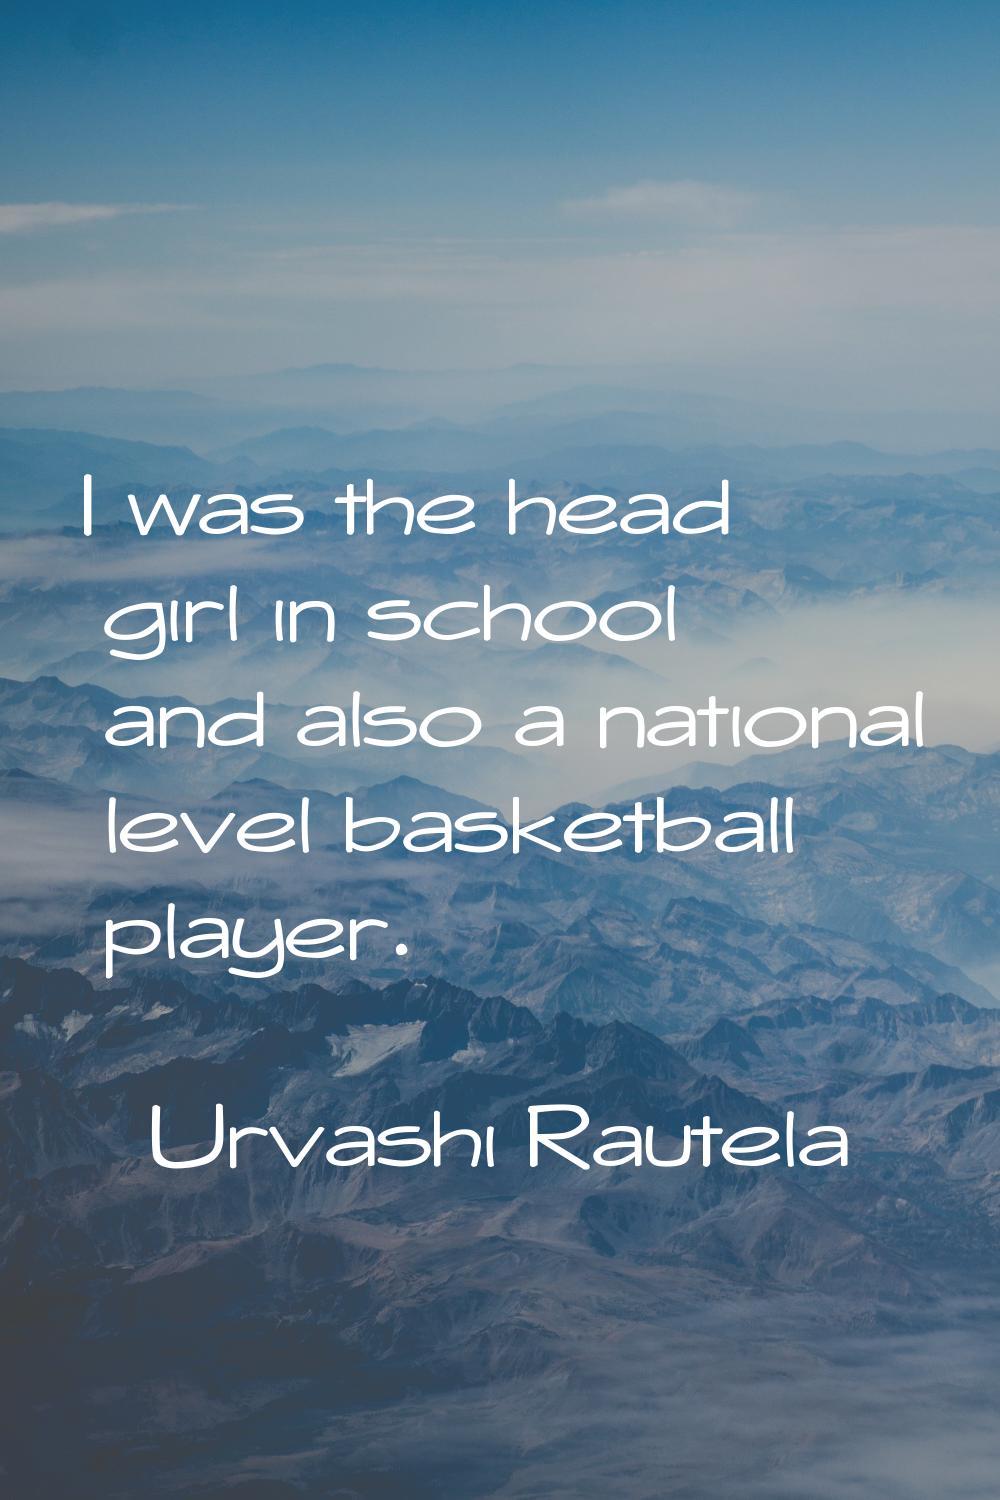 I was the head girl in school and also a national level basketball player.